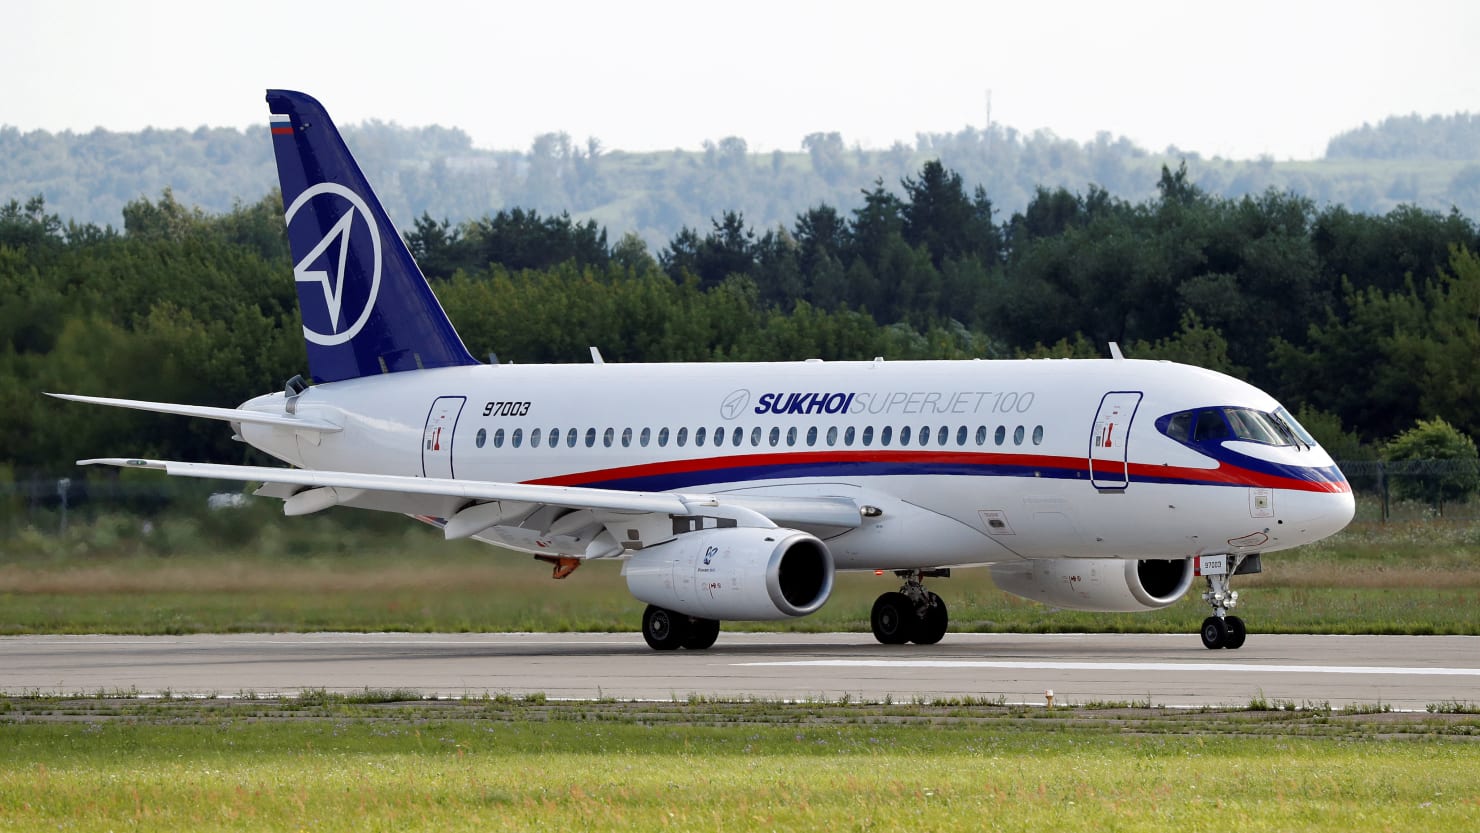 Passenger Jet Crashes Out of doors Moscow, Killing All on Board